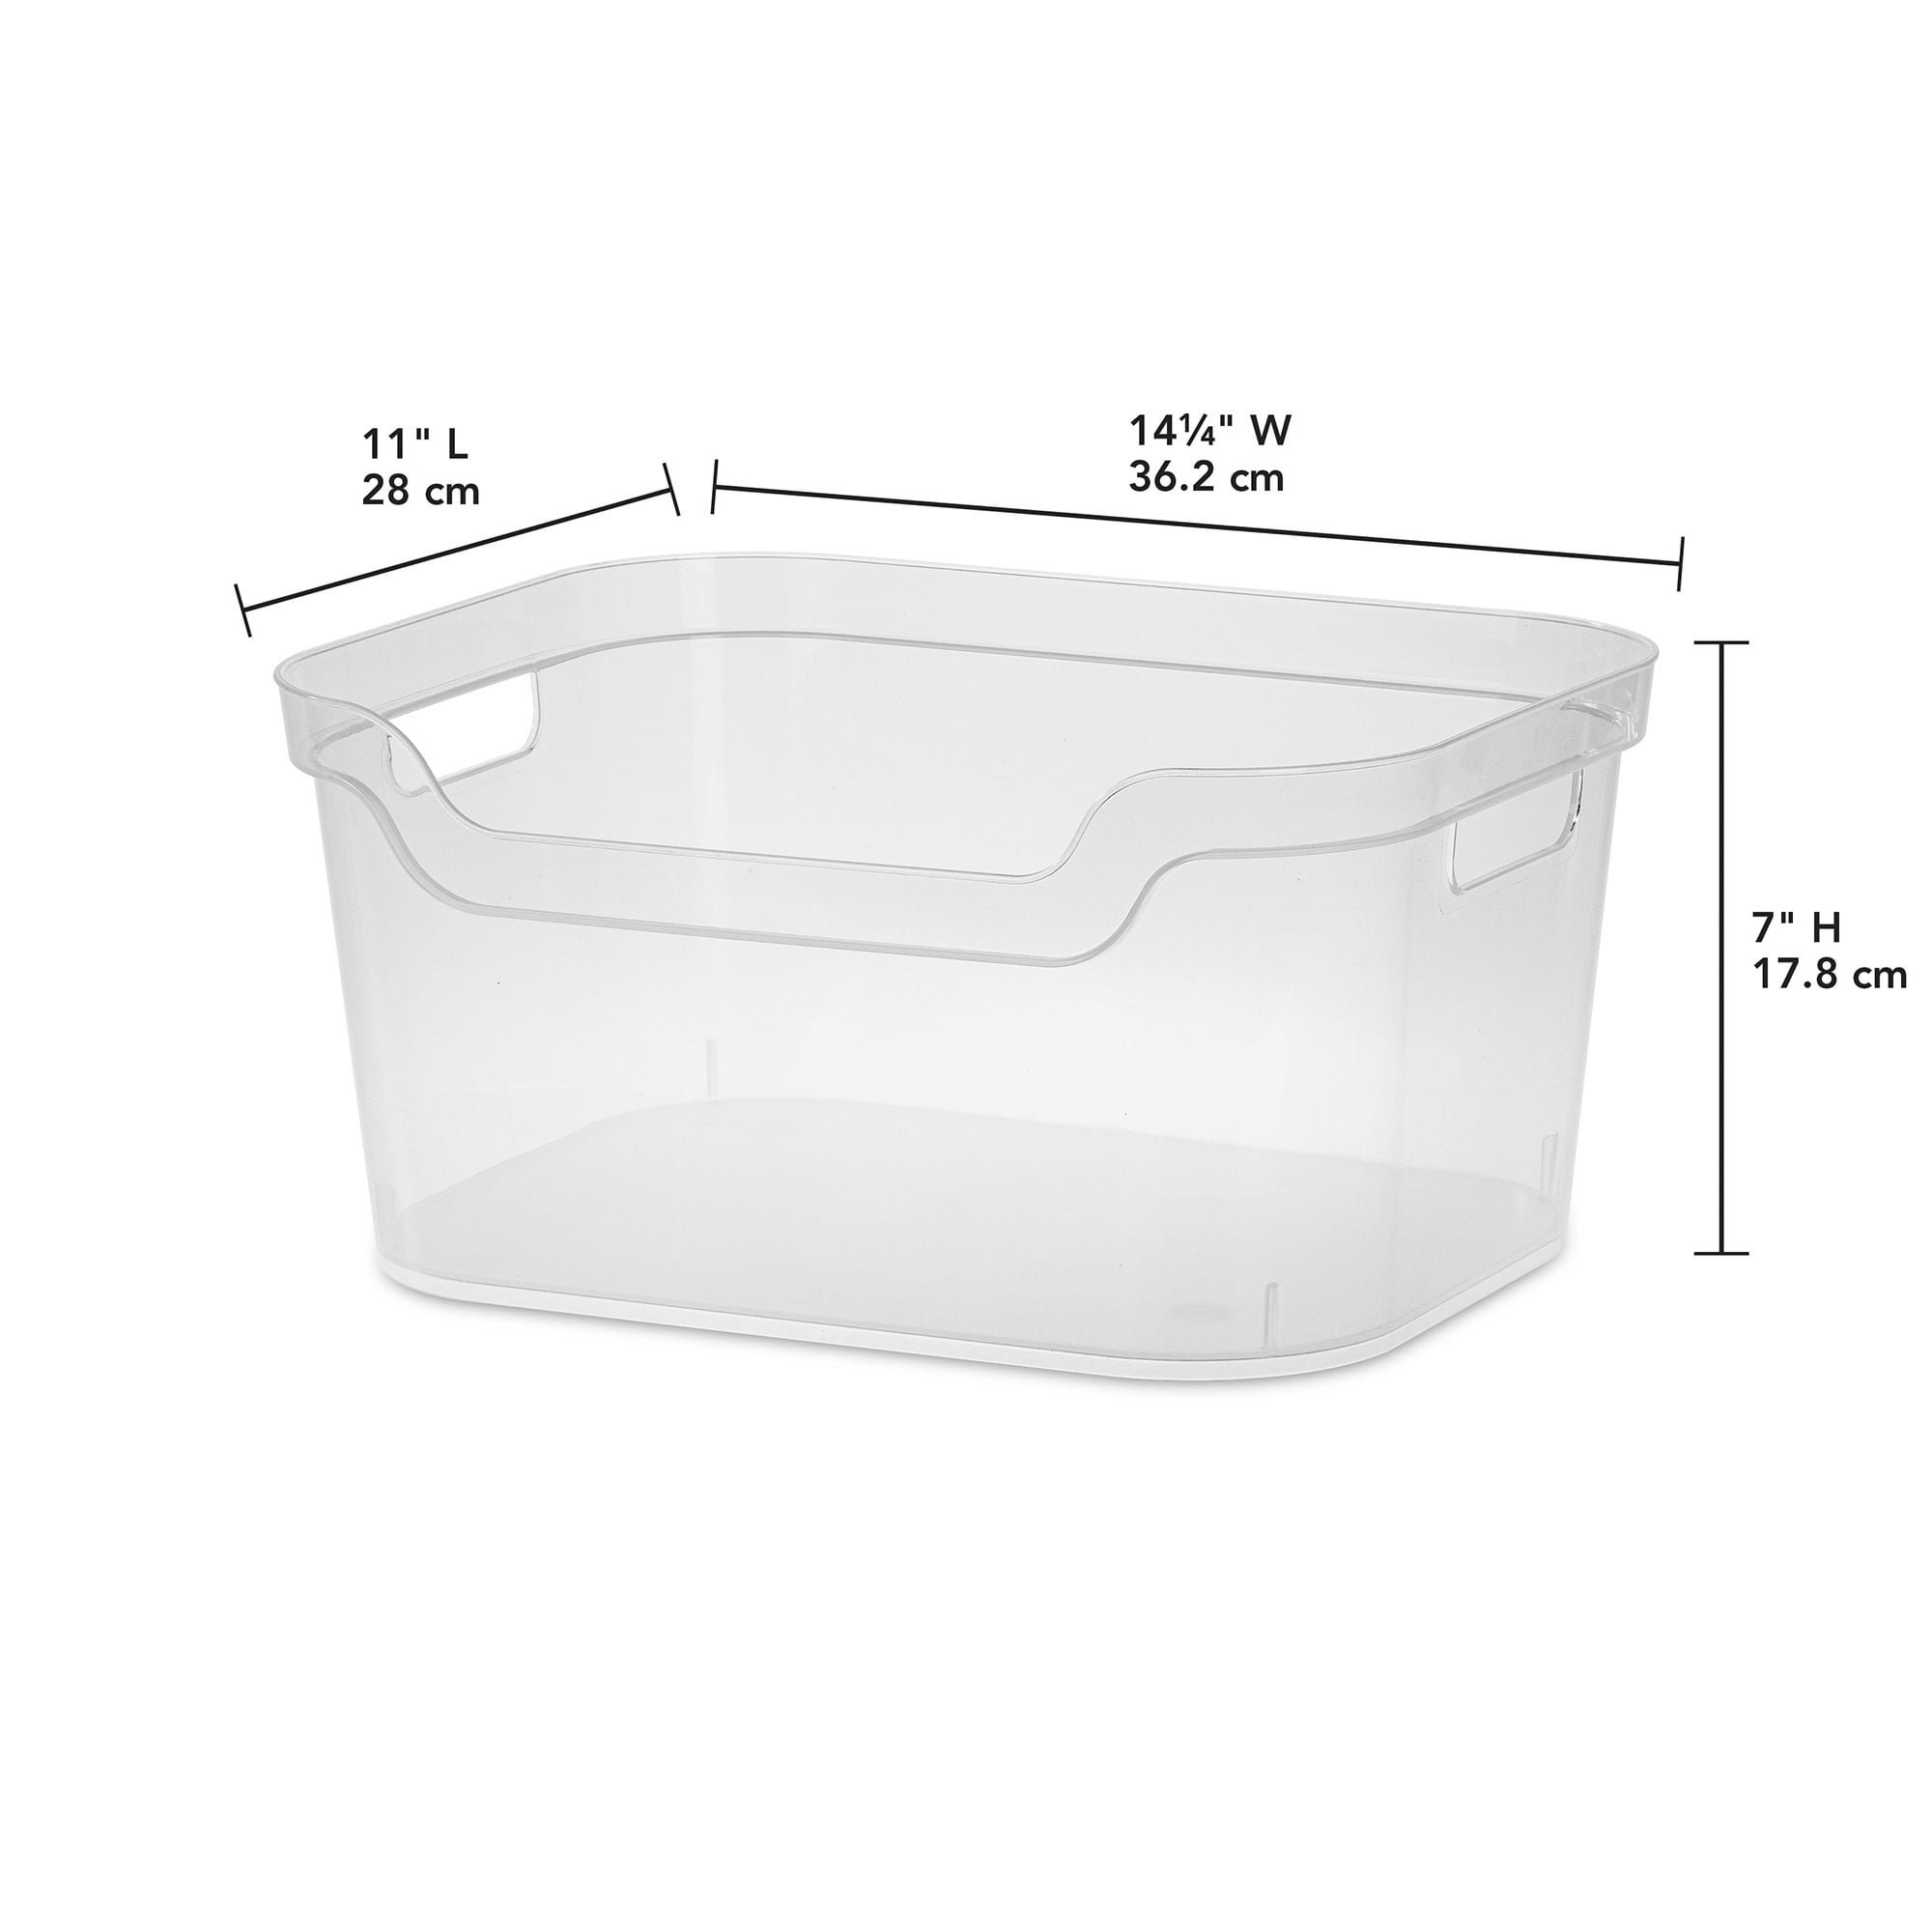 Large Storage Tote with Lid, 11x6x7.5-in.